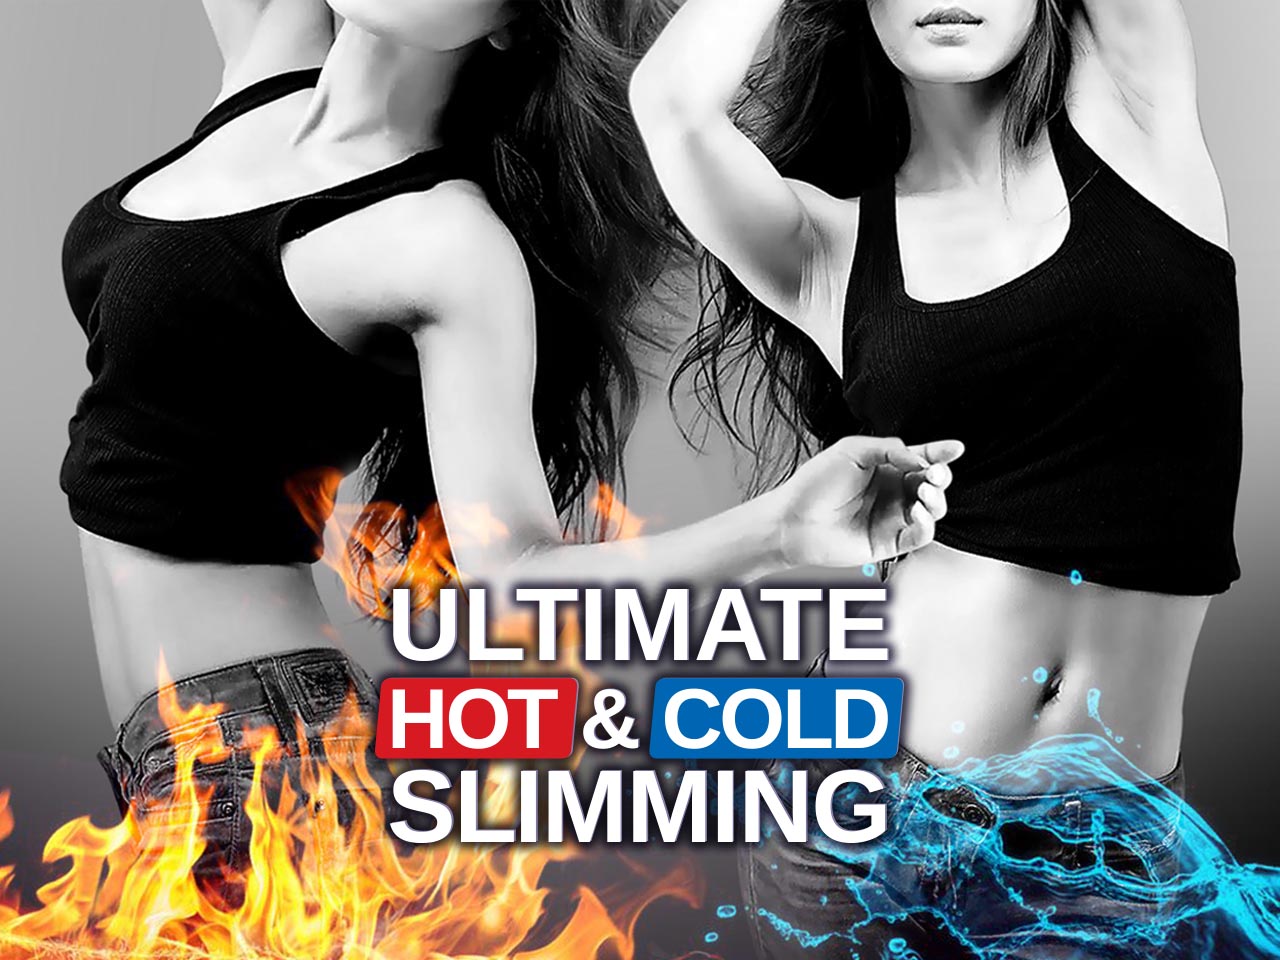 Ultimate Hot & Cold Slimming